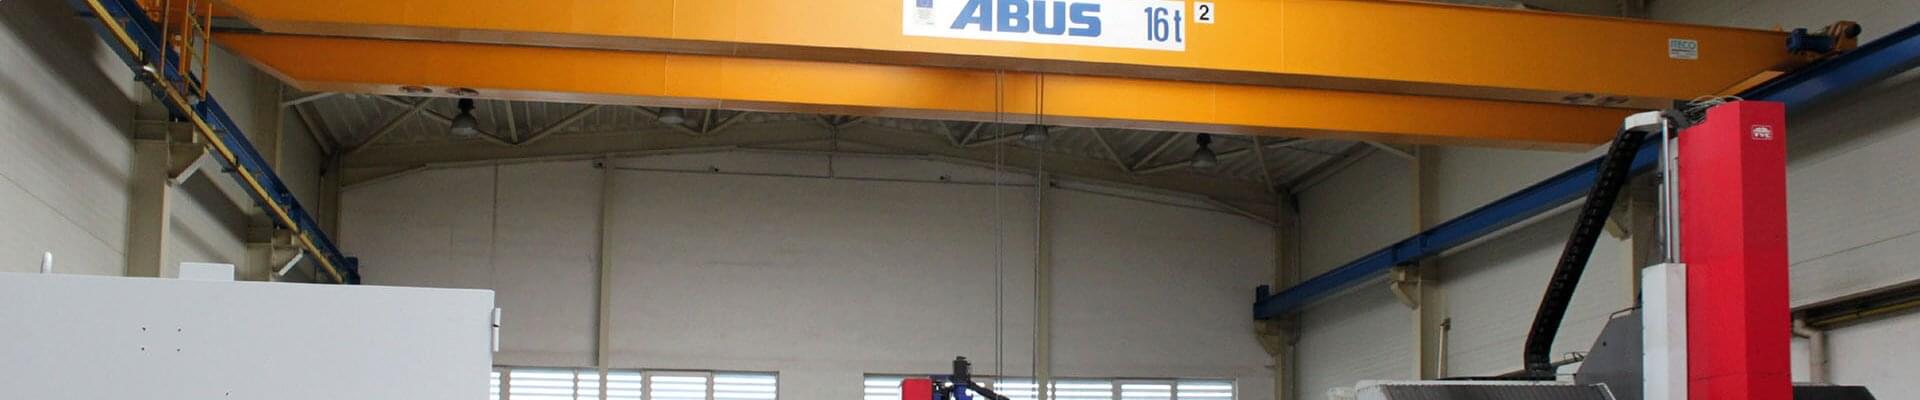 ABUS cranes in production for metal sawing machines in Czech Republic